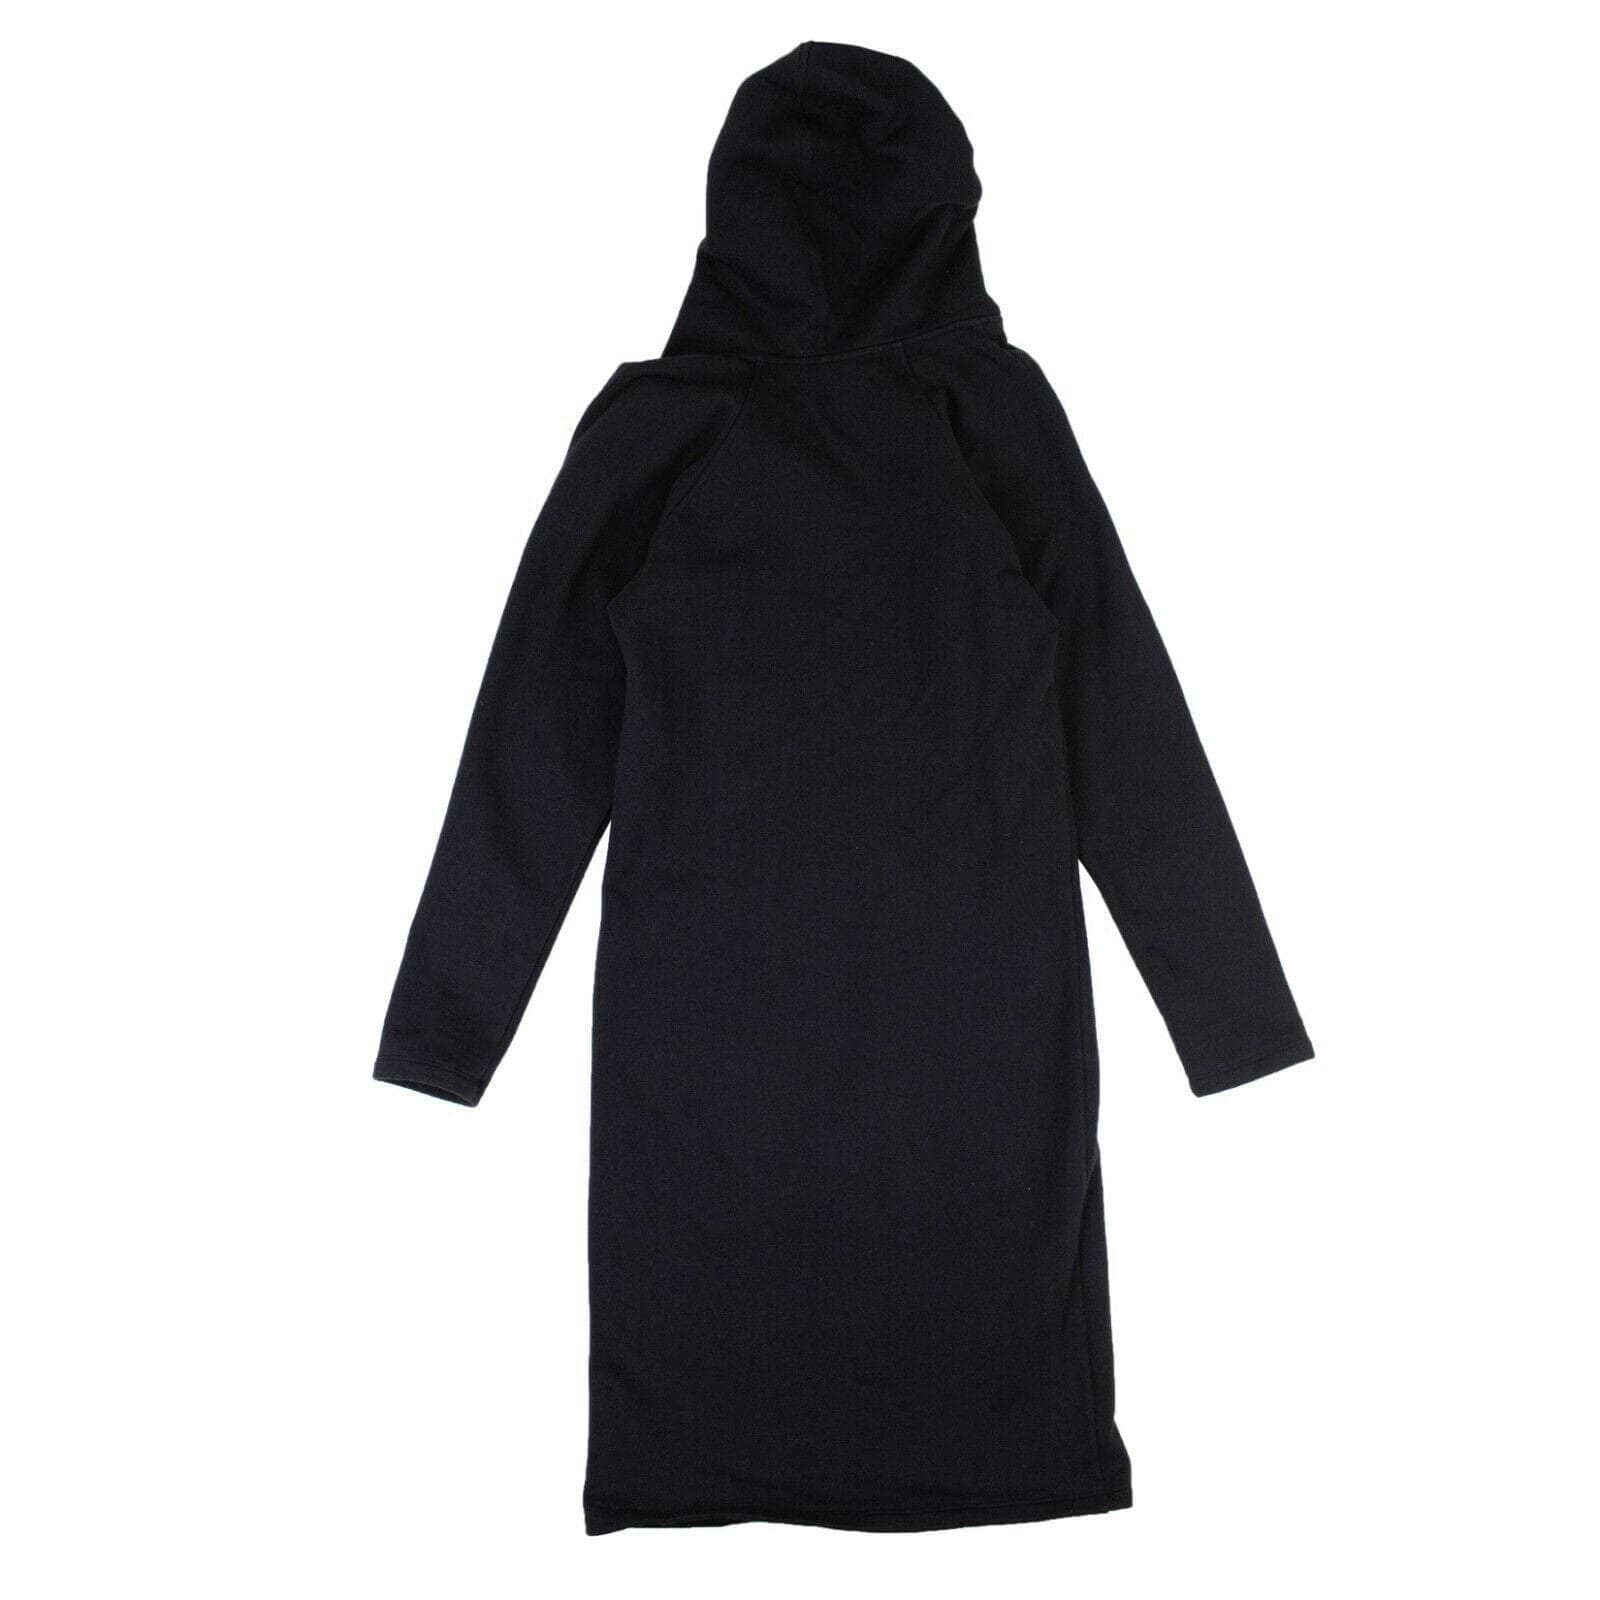 A_Plan_Application 250-500, a_plan_application, channelenable-all, chicmi, couponcollection, gender-womens, main-clothing, size-s, womens-day-dresses S Navy Blue Hooded Sweatshirt Dress 82NGG-AP-12/S 82NGG-AP-12/S